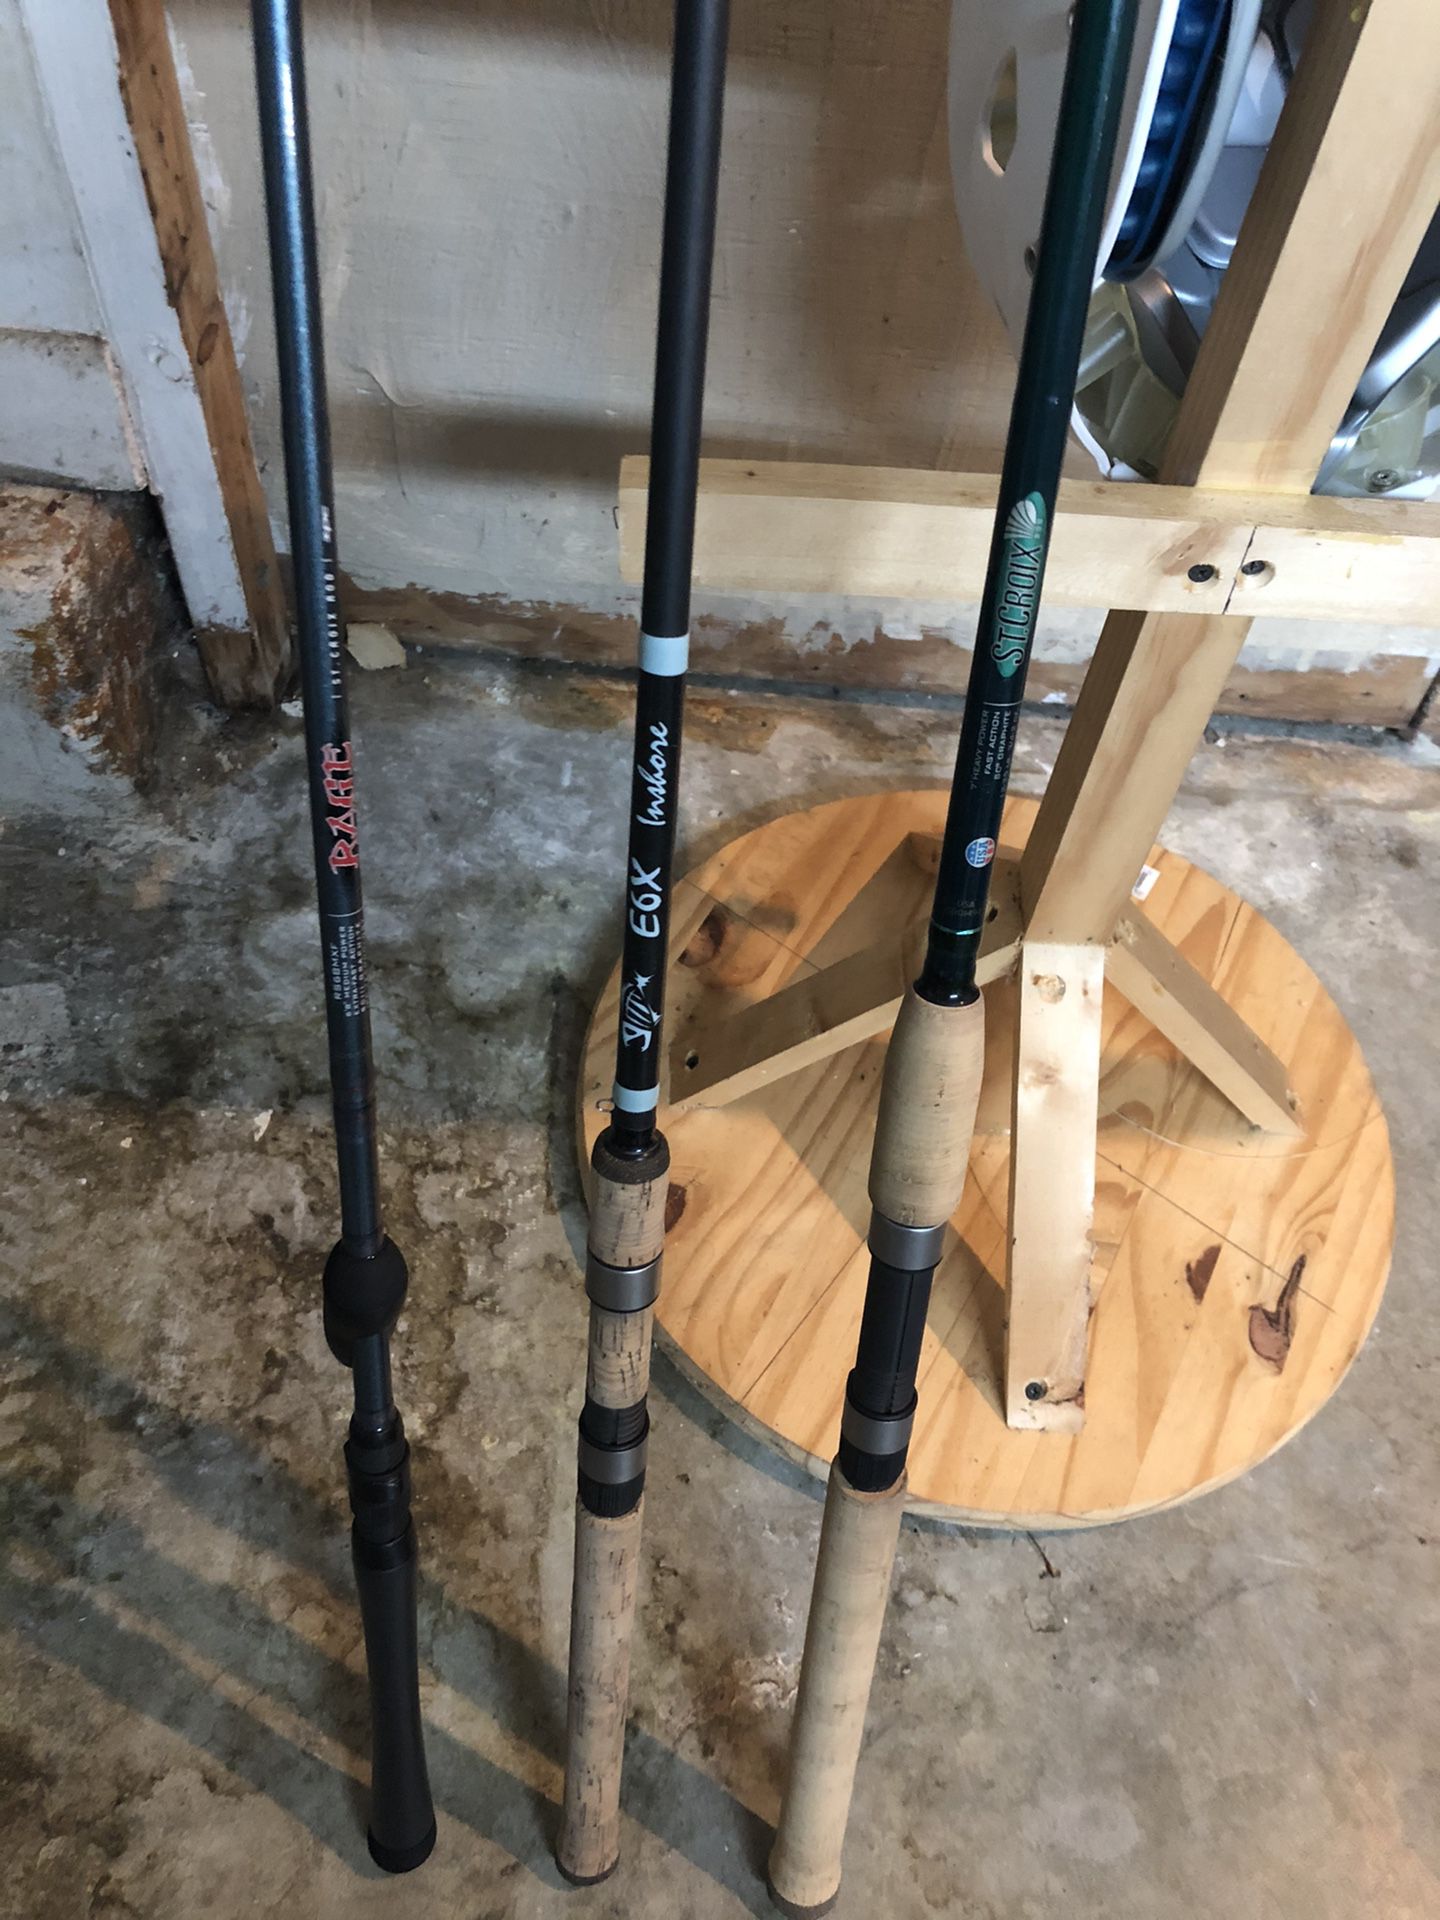 St Croix/ GLoomis fishing rods for sale or trade